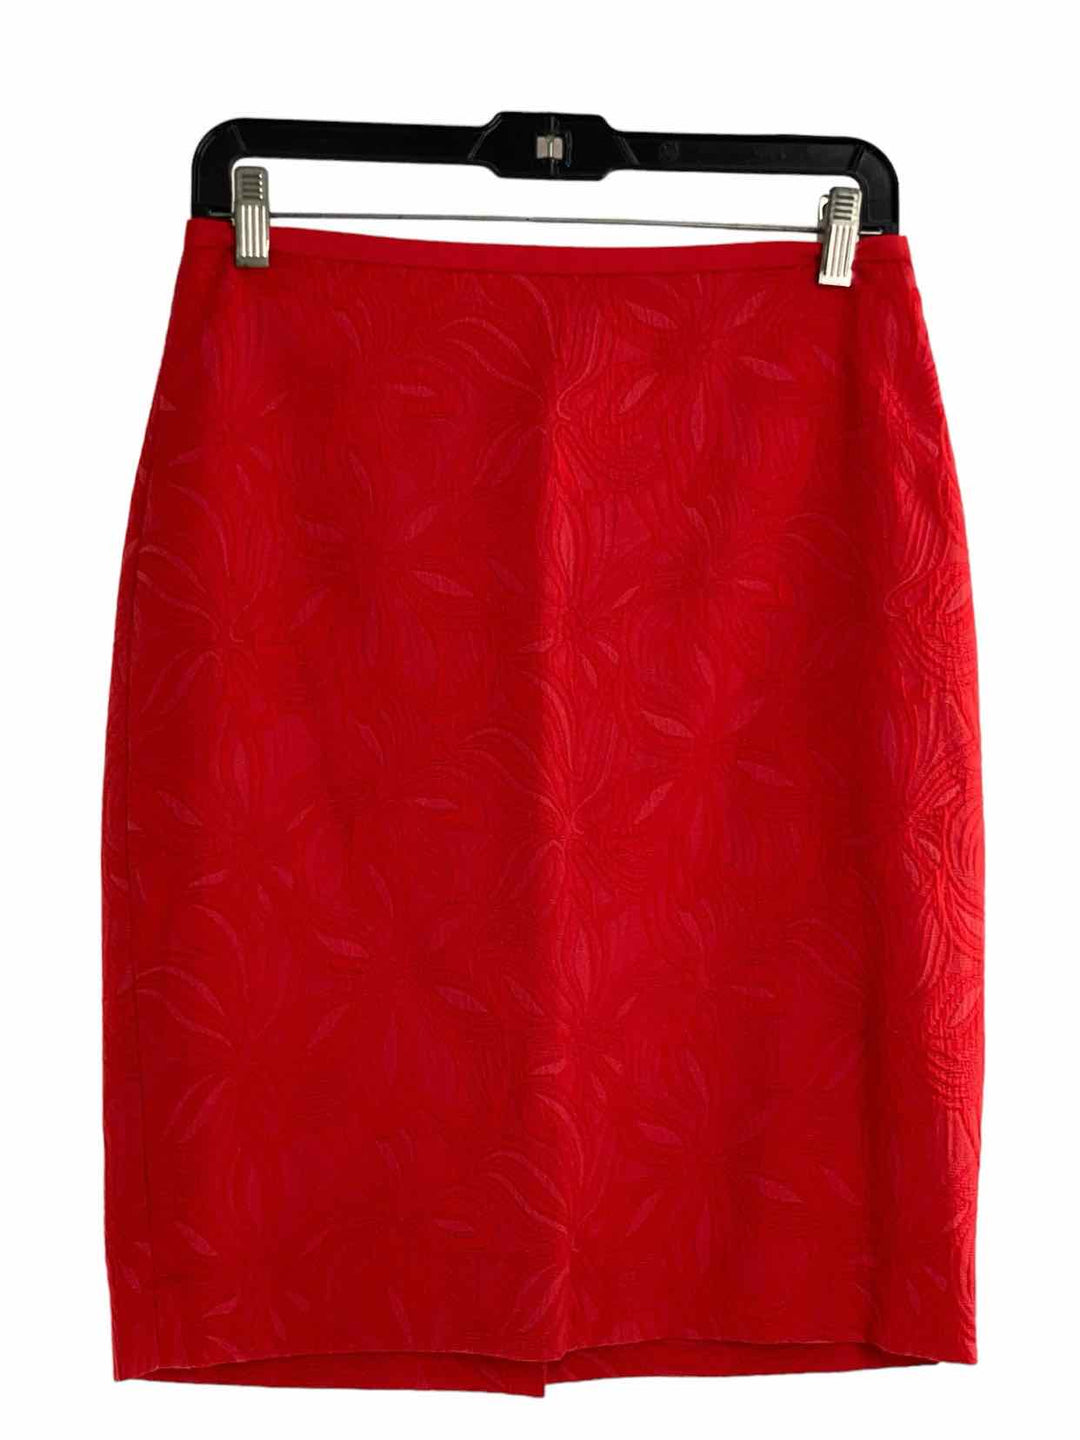 The Limited Size 4 Red Skirt